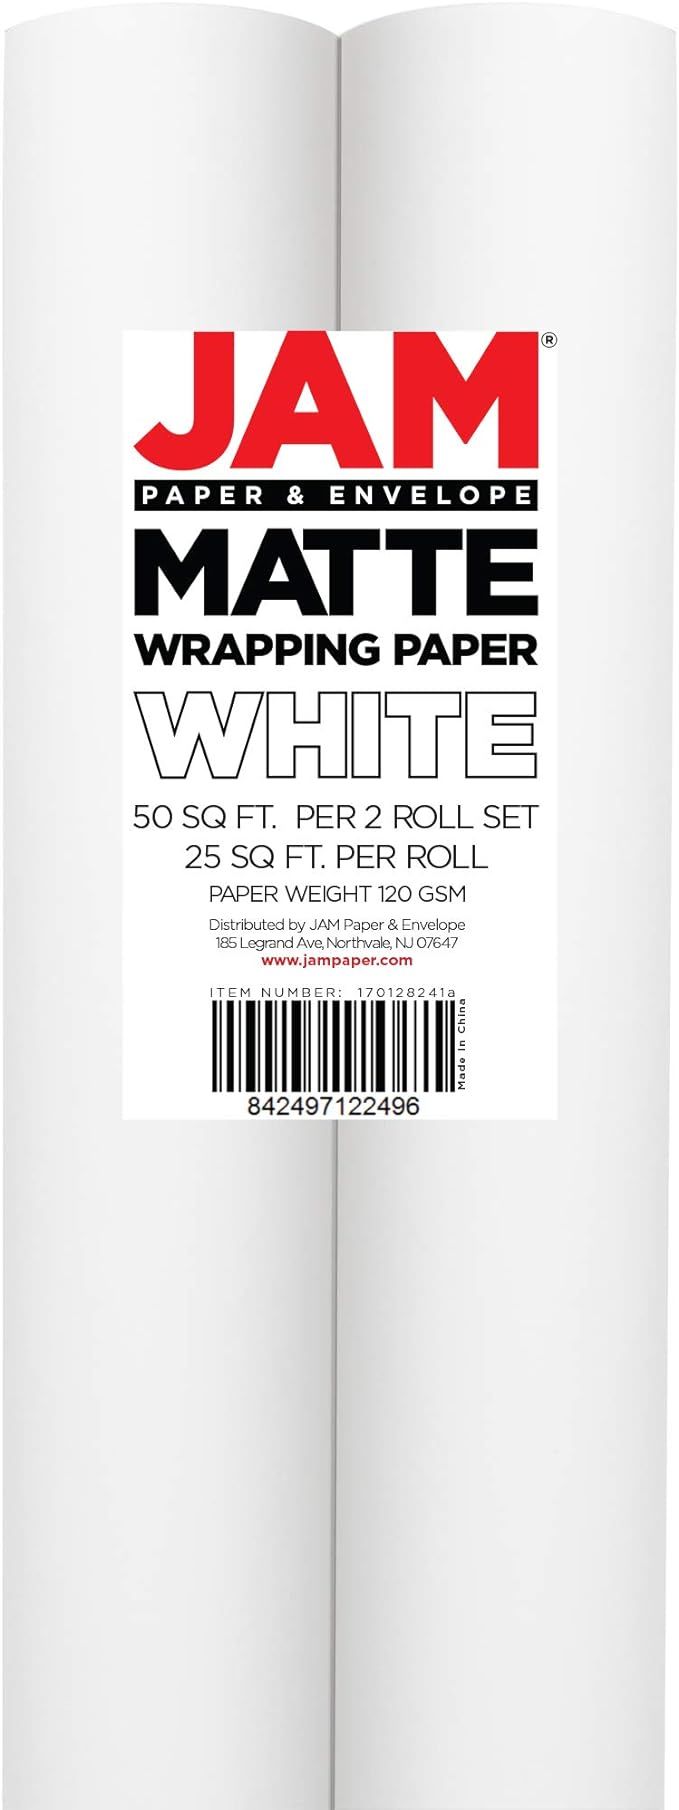 JAM PAPER Gift Wrap - Matte Wrapping Paper - 50 Sq Ft Total - Matte White - 2 Rolls/Pack | Amazon (US)